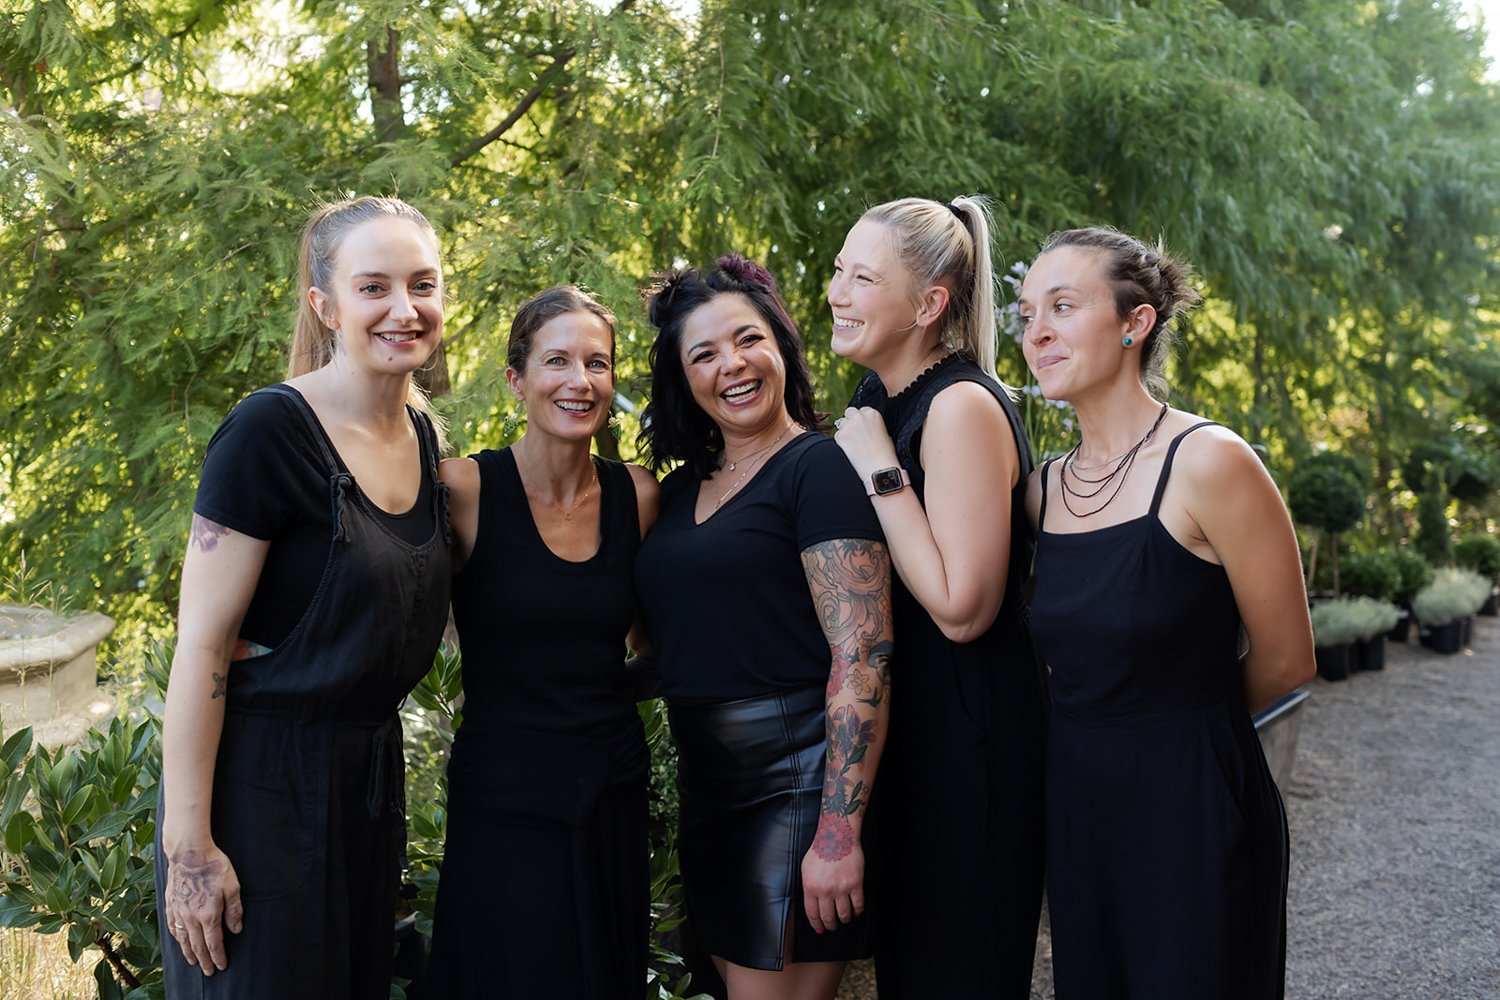 group of women laughing at wedding the team of art de cuisine women owned catering business in portland oregon